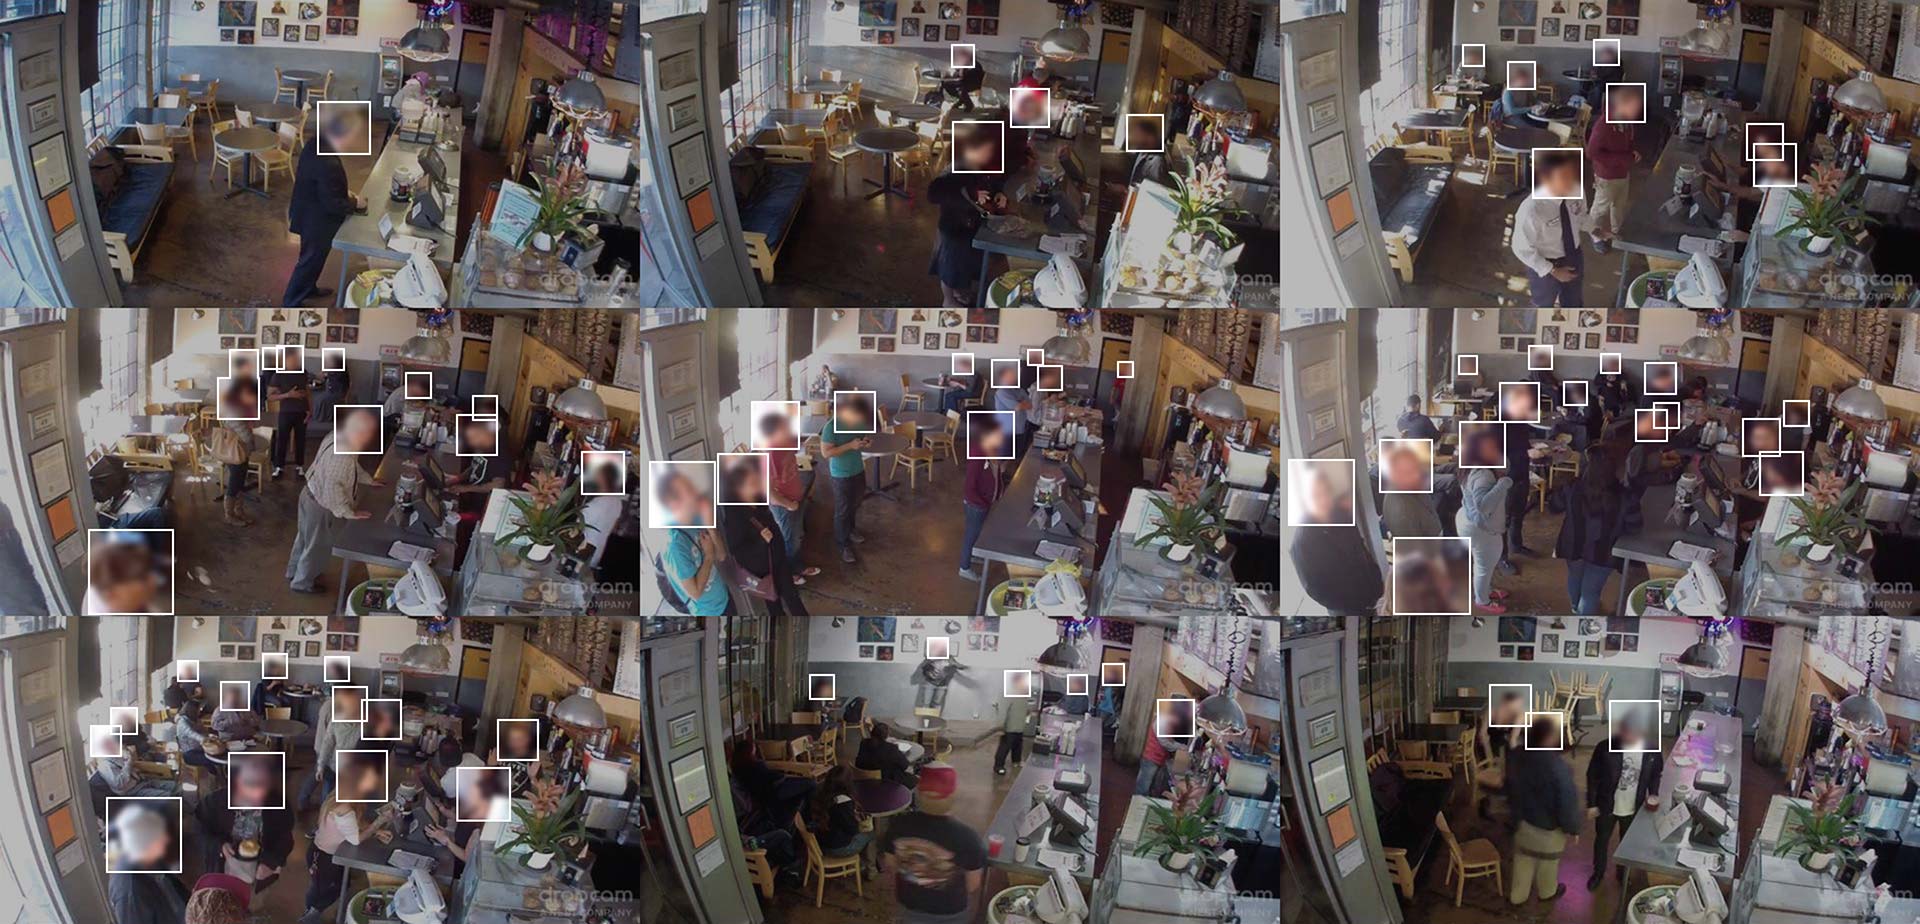 Still images from the Brainwash dataset created from a livecam feed from a cafe in San Francisco that was in multiple research projects for developing head detection algorithms.